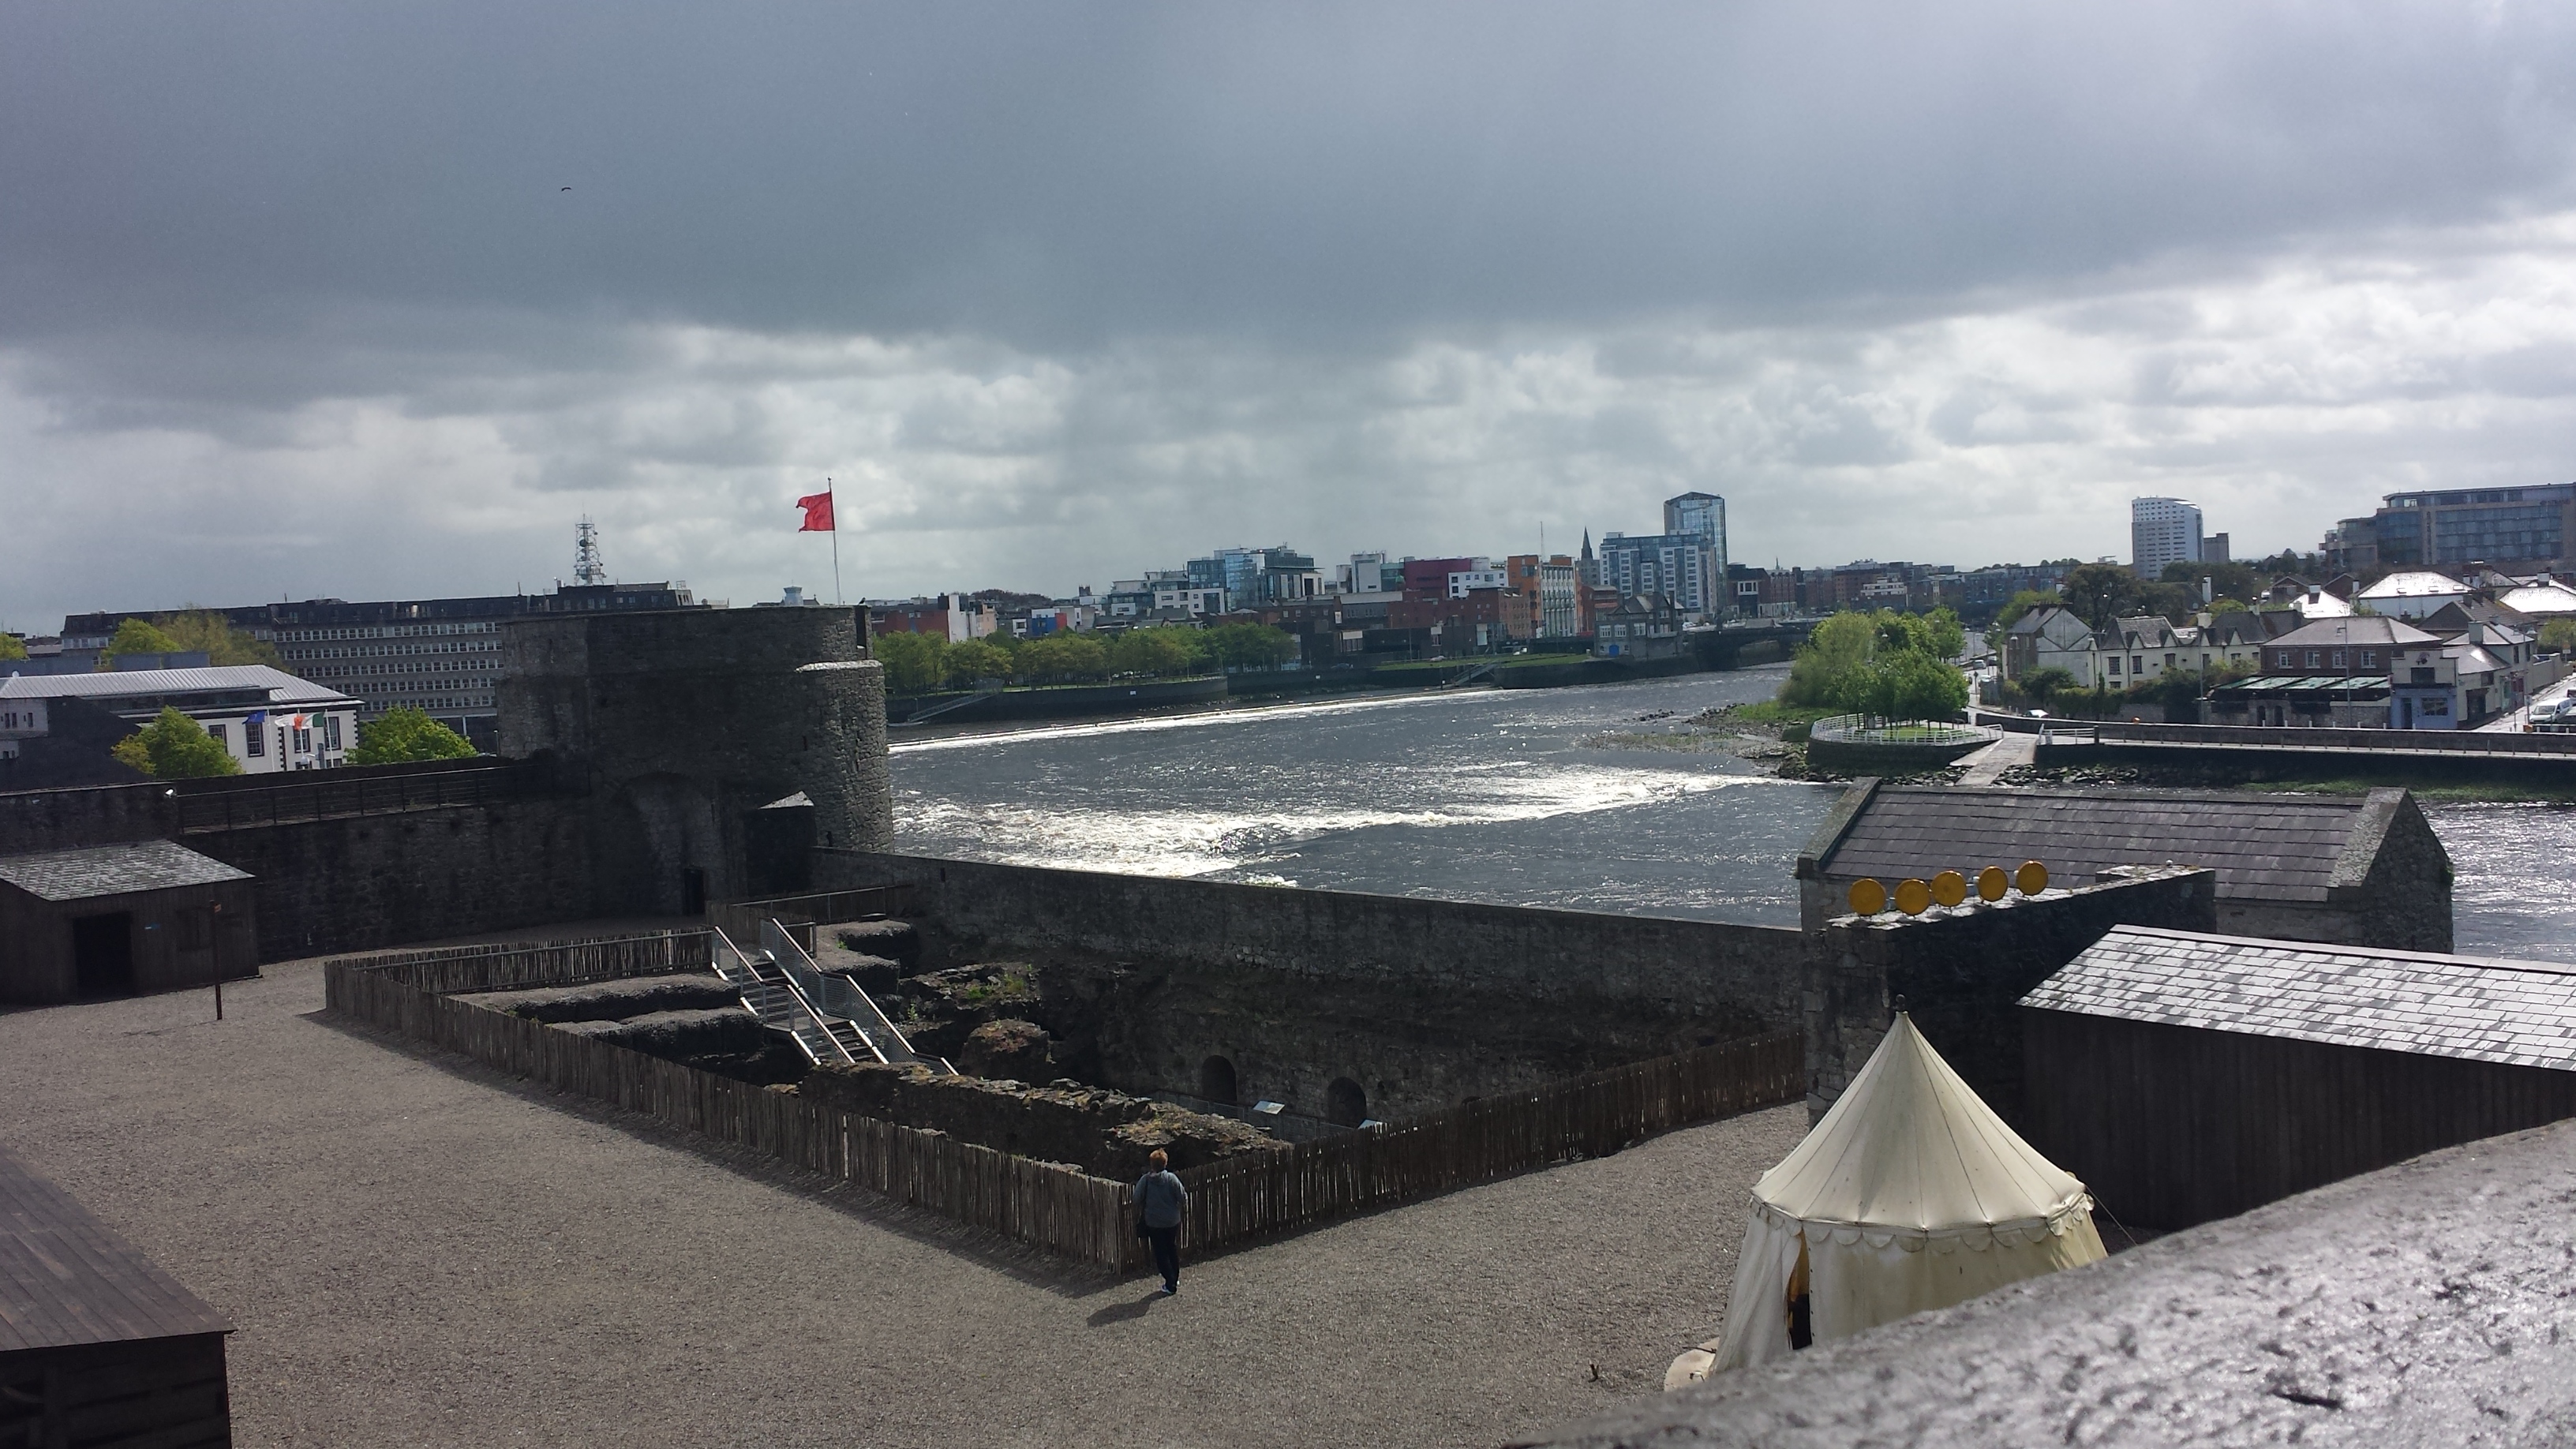 view of Limerick and the River Shannon from one of the towers of the castle. You can see the inside of the castle area as well, where the excavation goes below ground level.